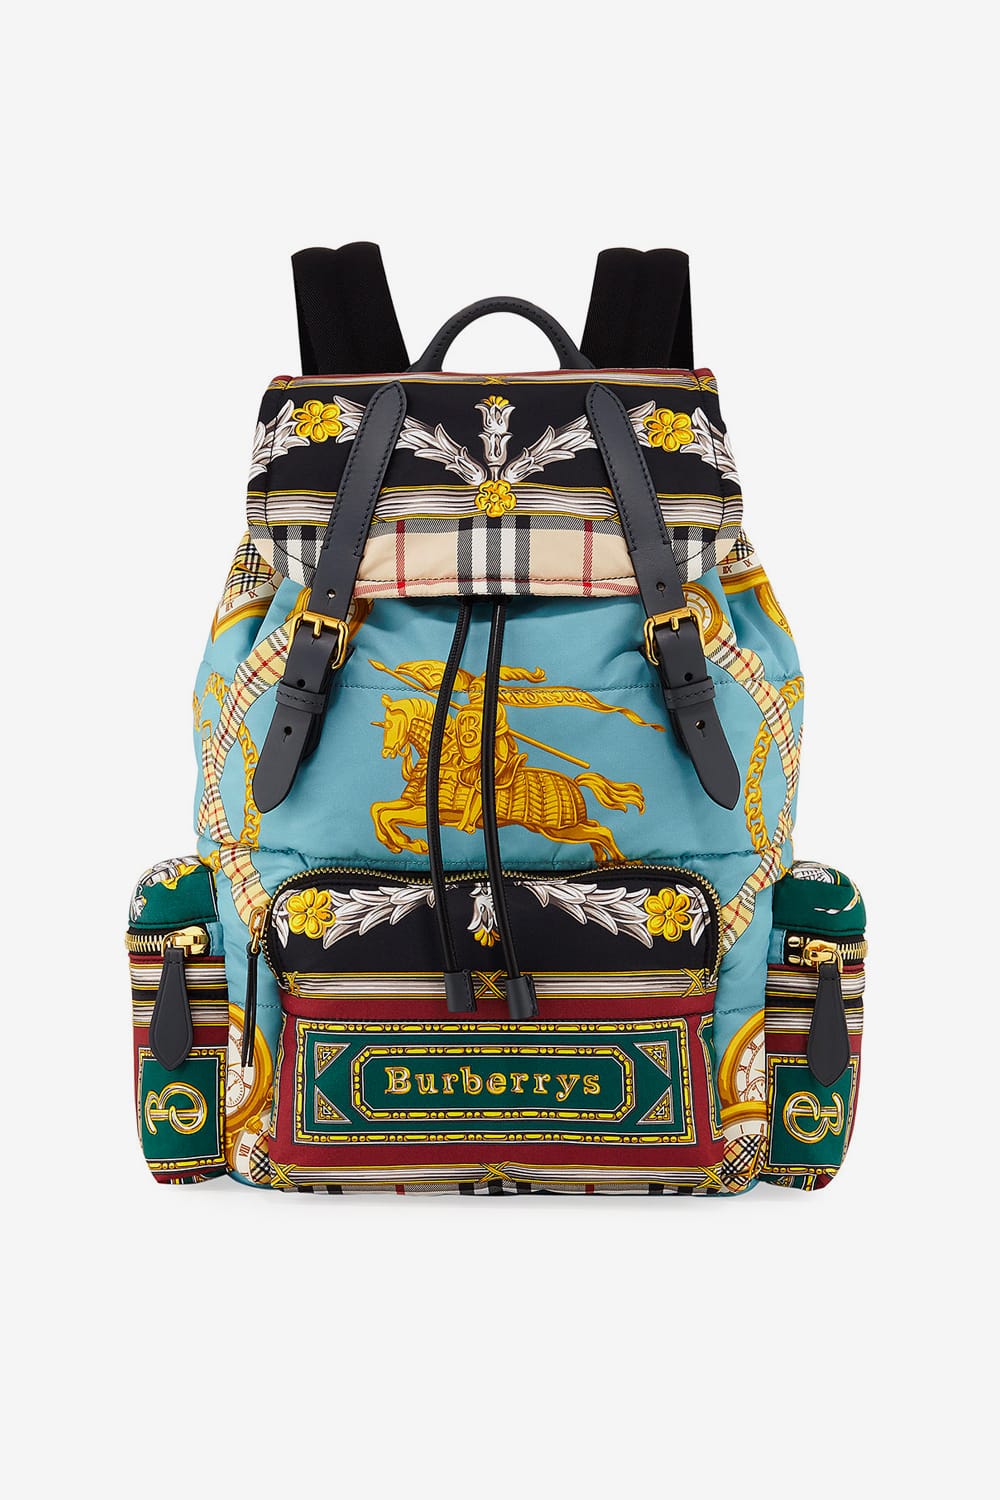 Burberry Archive Scarf Print Backpack 